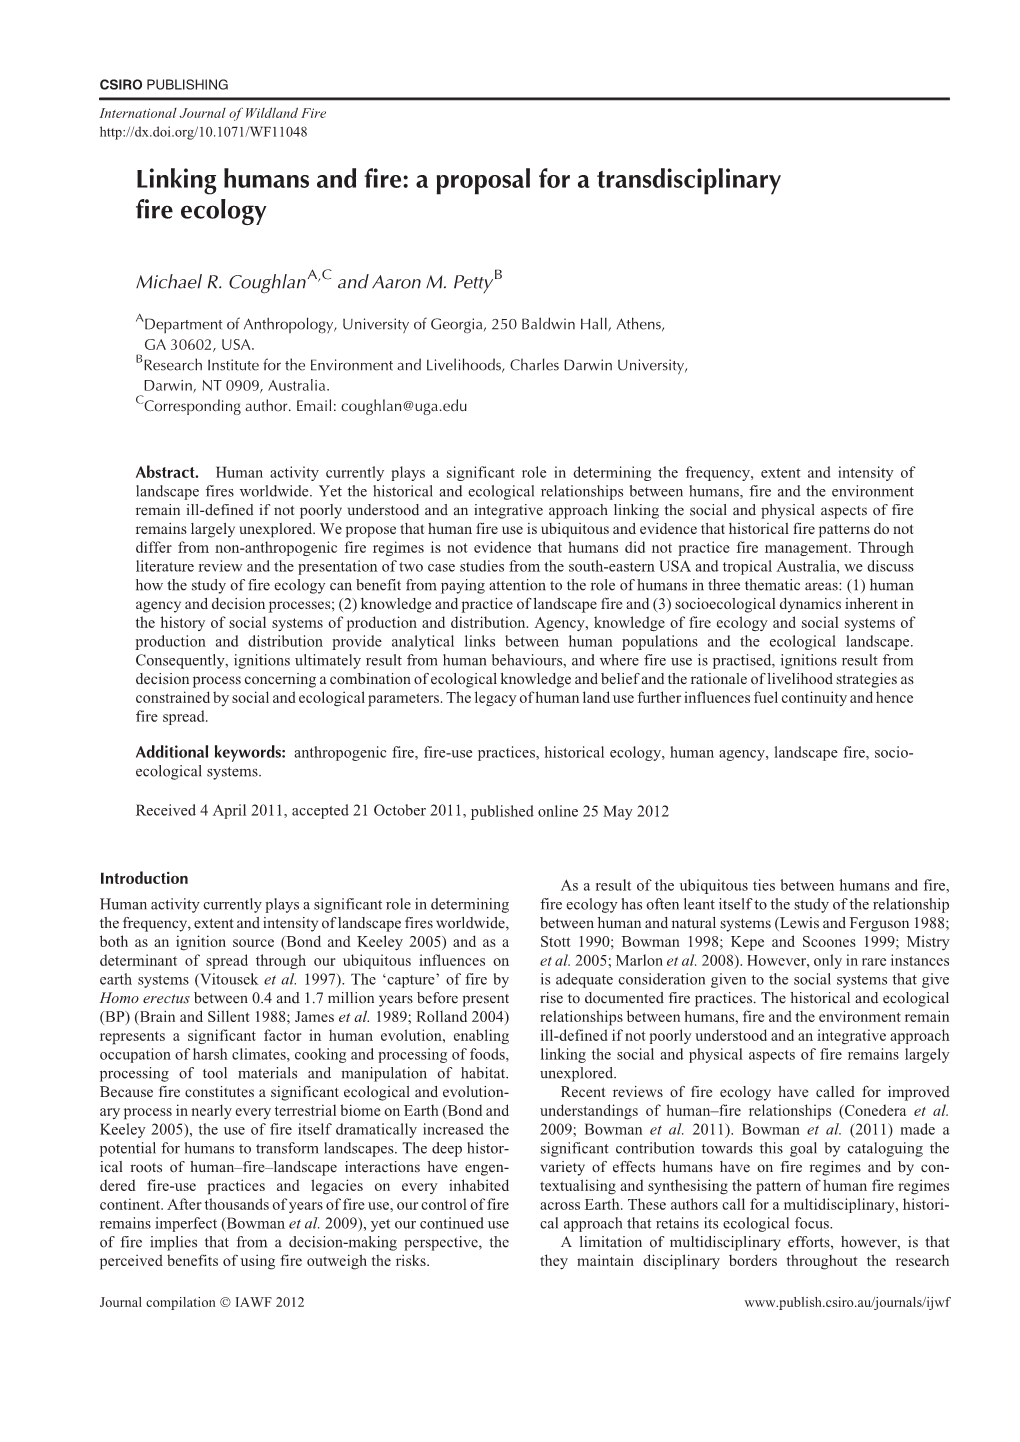 Linking Humans and Fire: a Proposal for a Transdisciplinary Fire Ecology